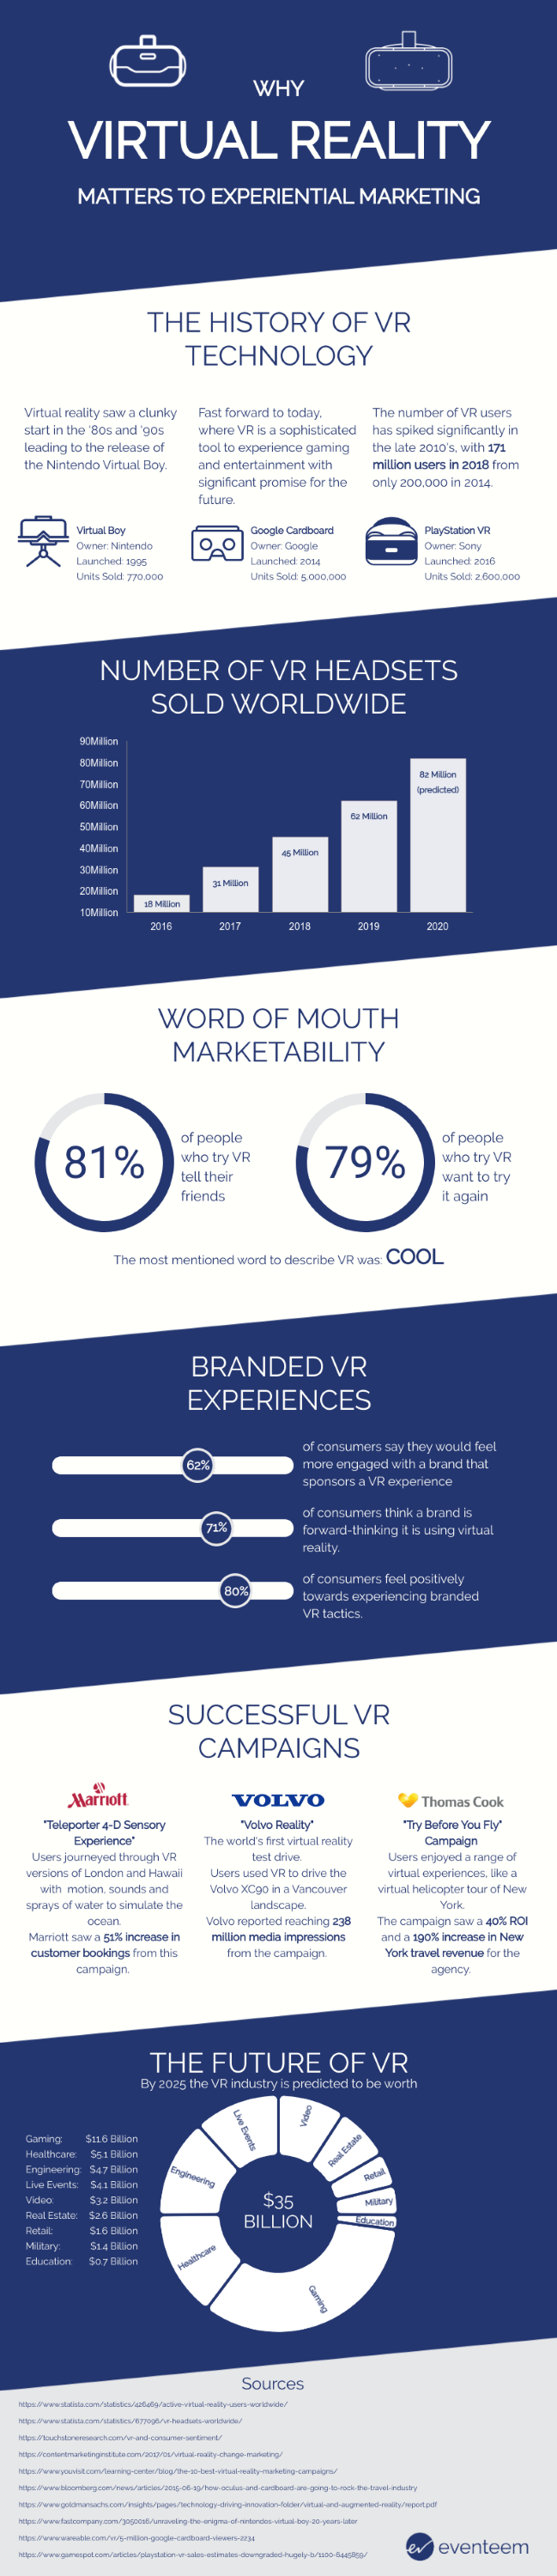 virtual reality experiential marketing infographic